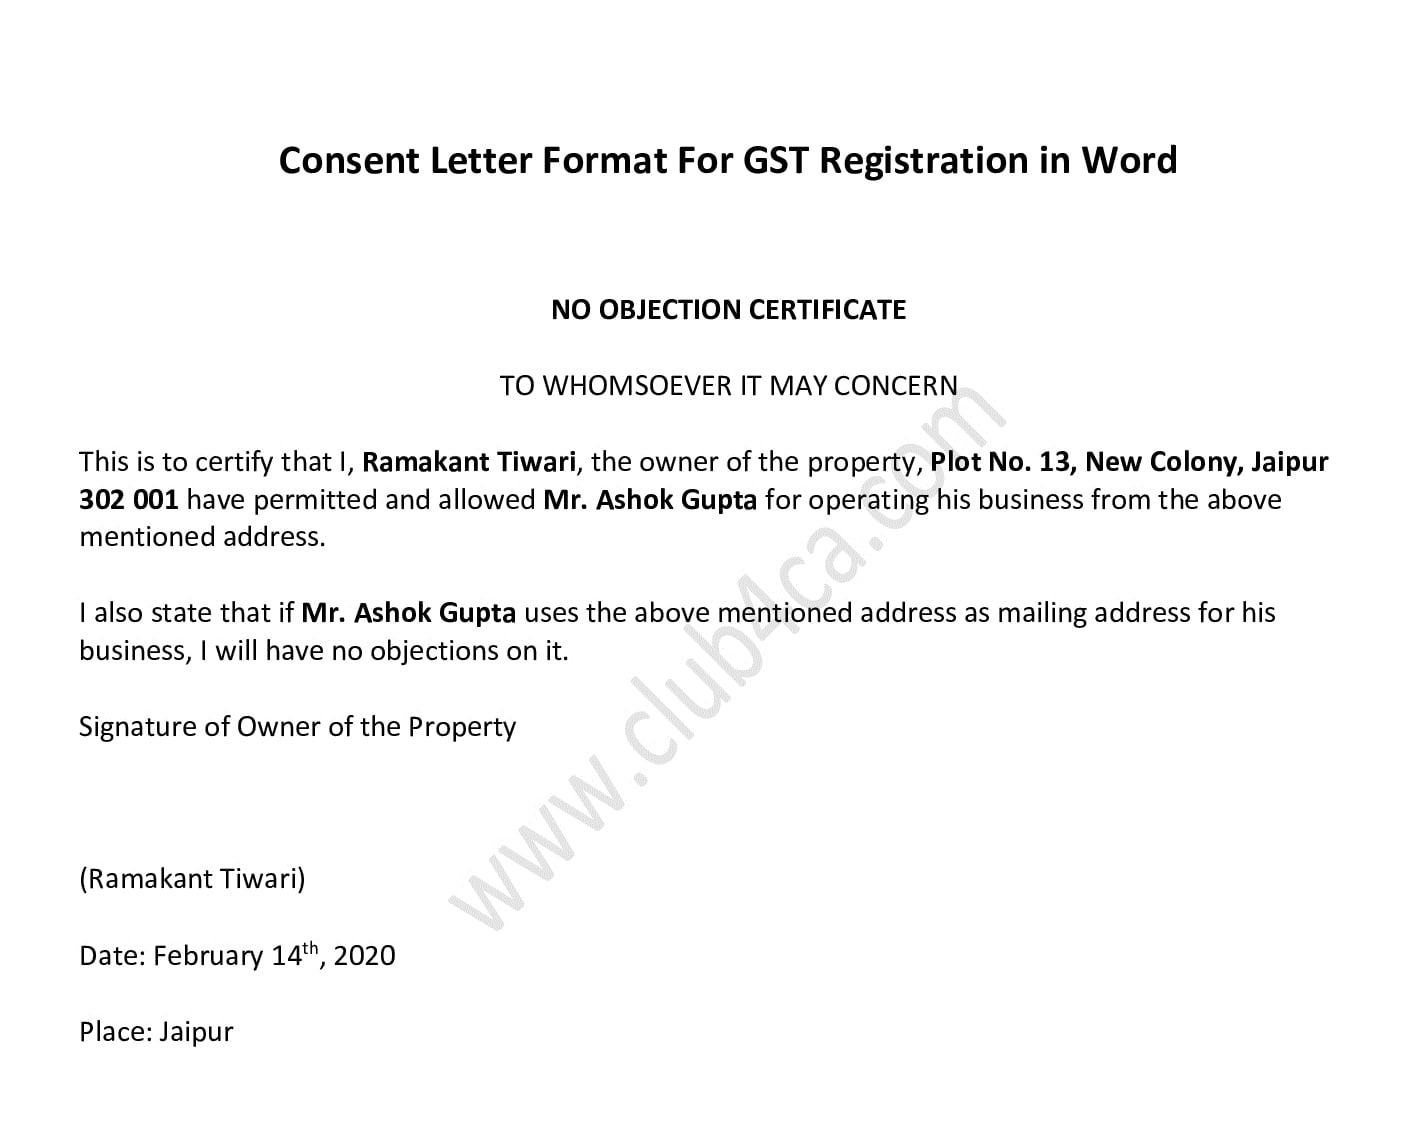 Consent Letter Format For GST Registration in Word For Letter Of Objection Template